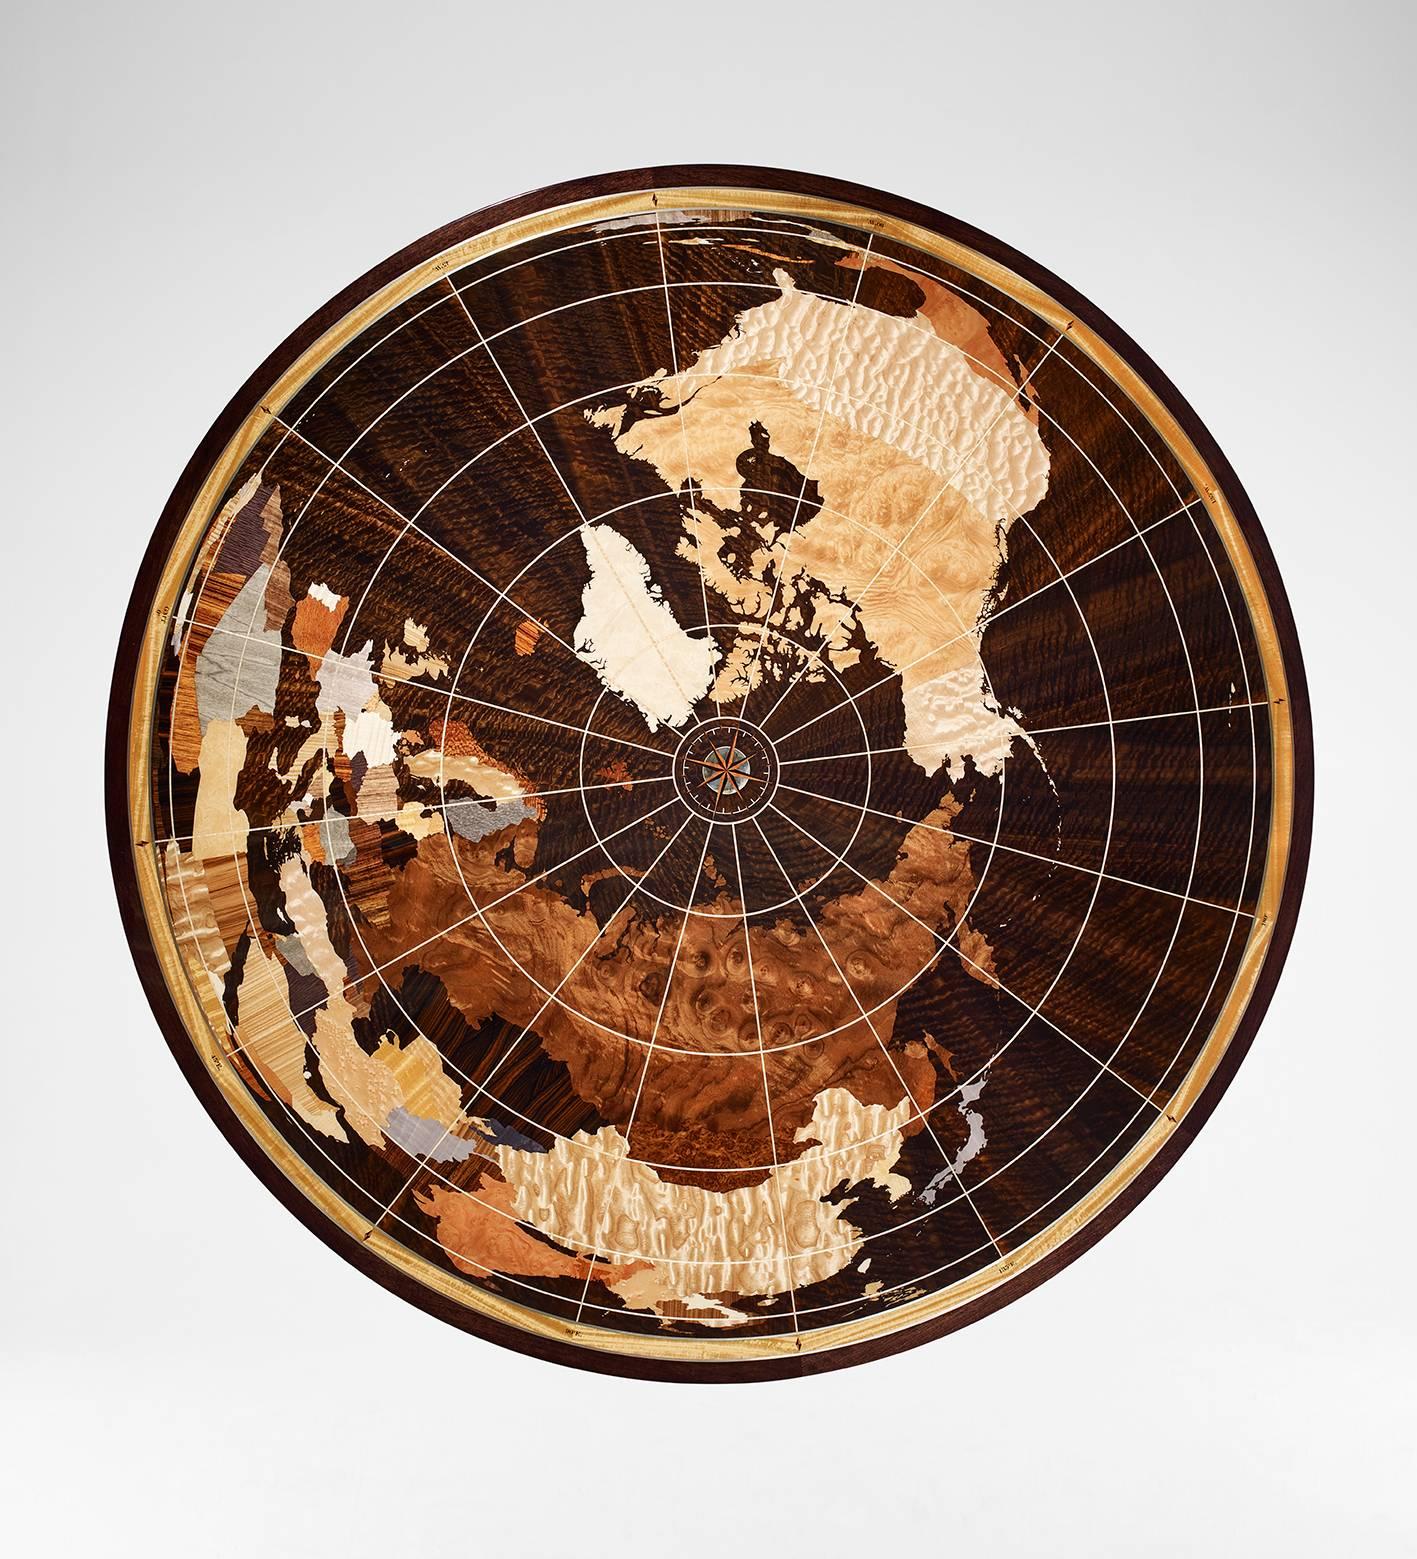 The unique Linley World Map table is hand-crafted by our specialist craftsmen in the UK using over 40 individually selected veneers.
The main body of the table is created out of stained Fulbeck walnut in a high gloss finish. The base features